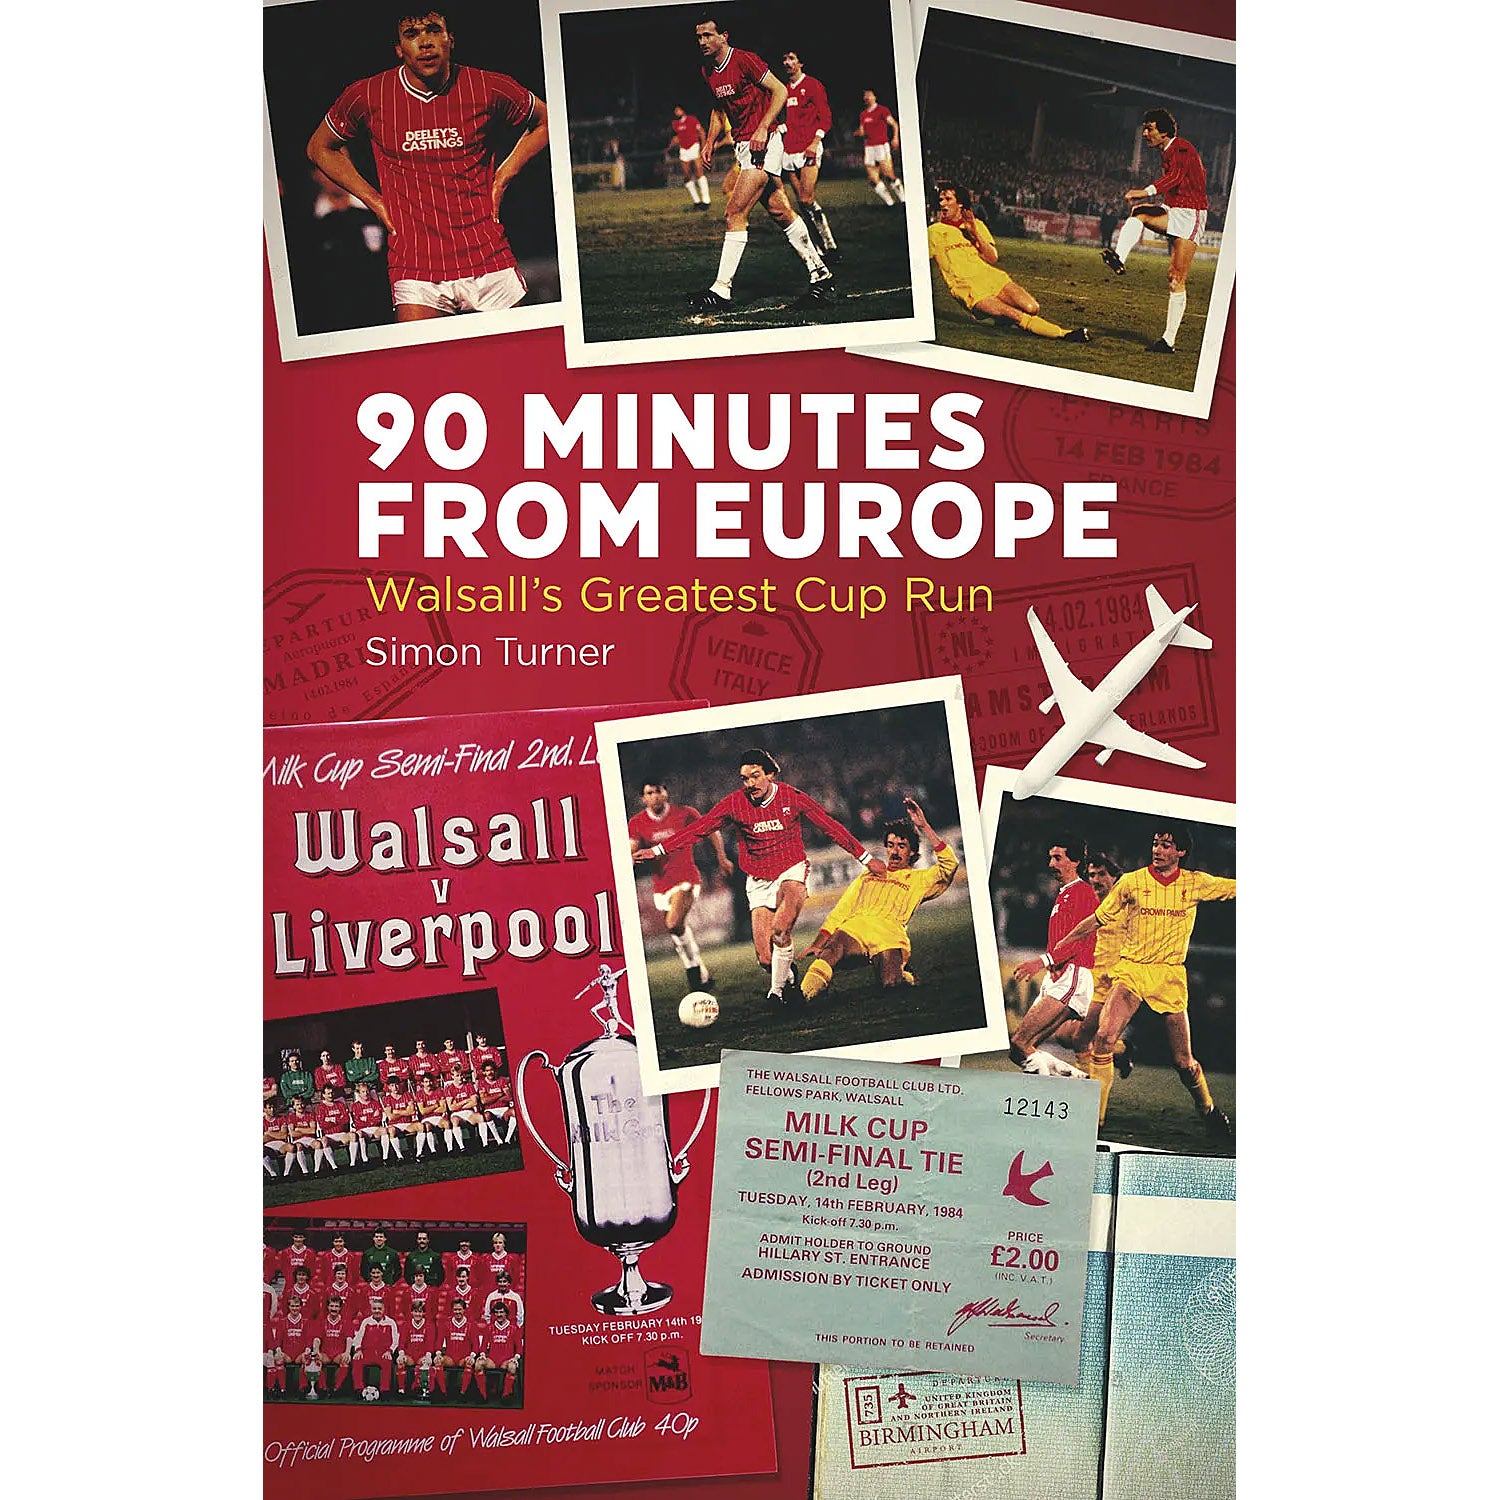 90 Minutes from Europe – Walsall's Greatest Cup Run